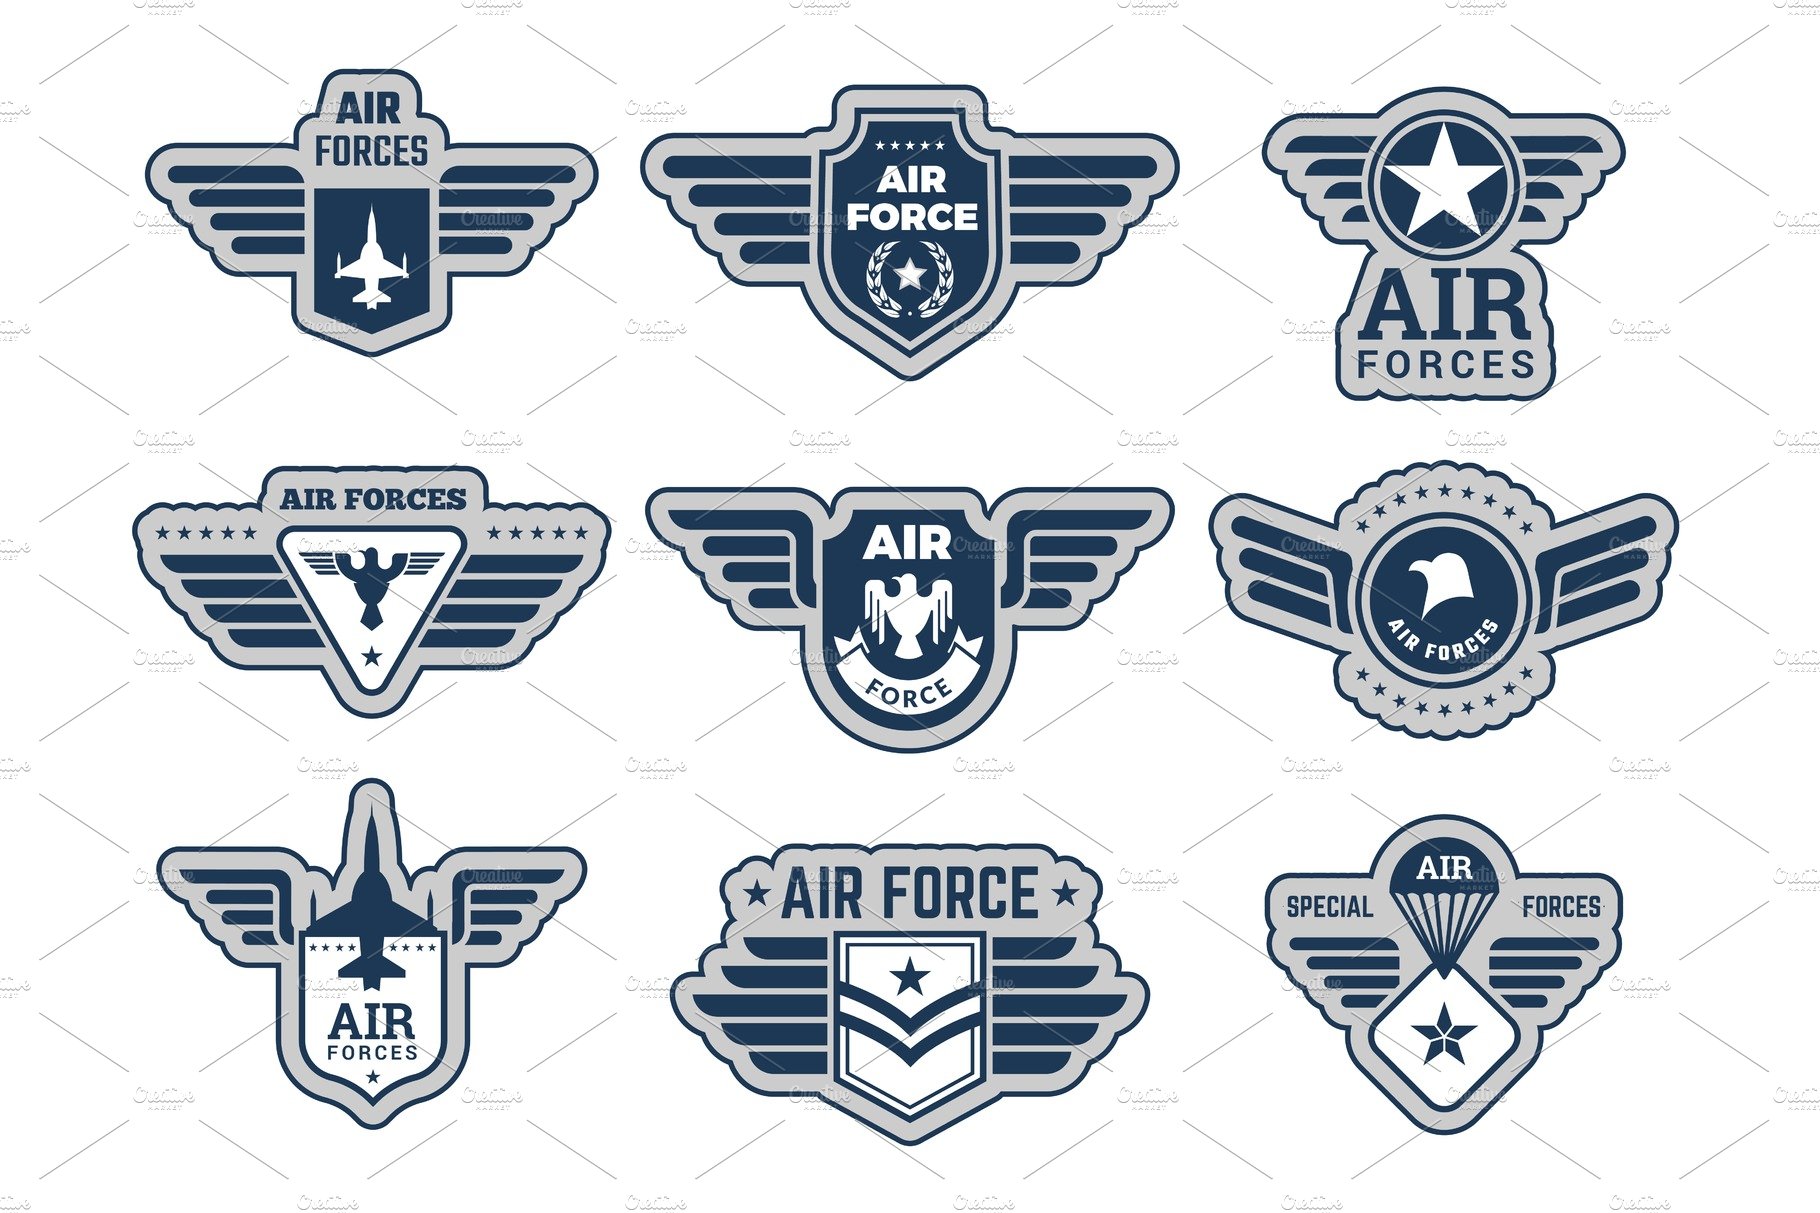 Air force labels. Vintage army cover image.